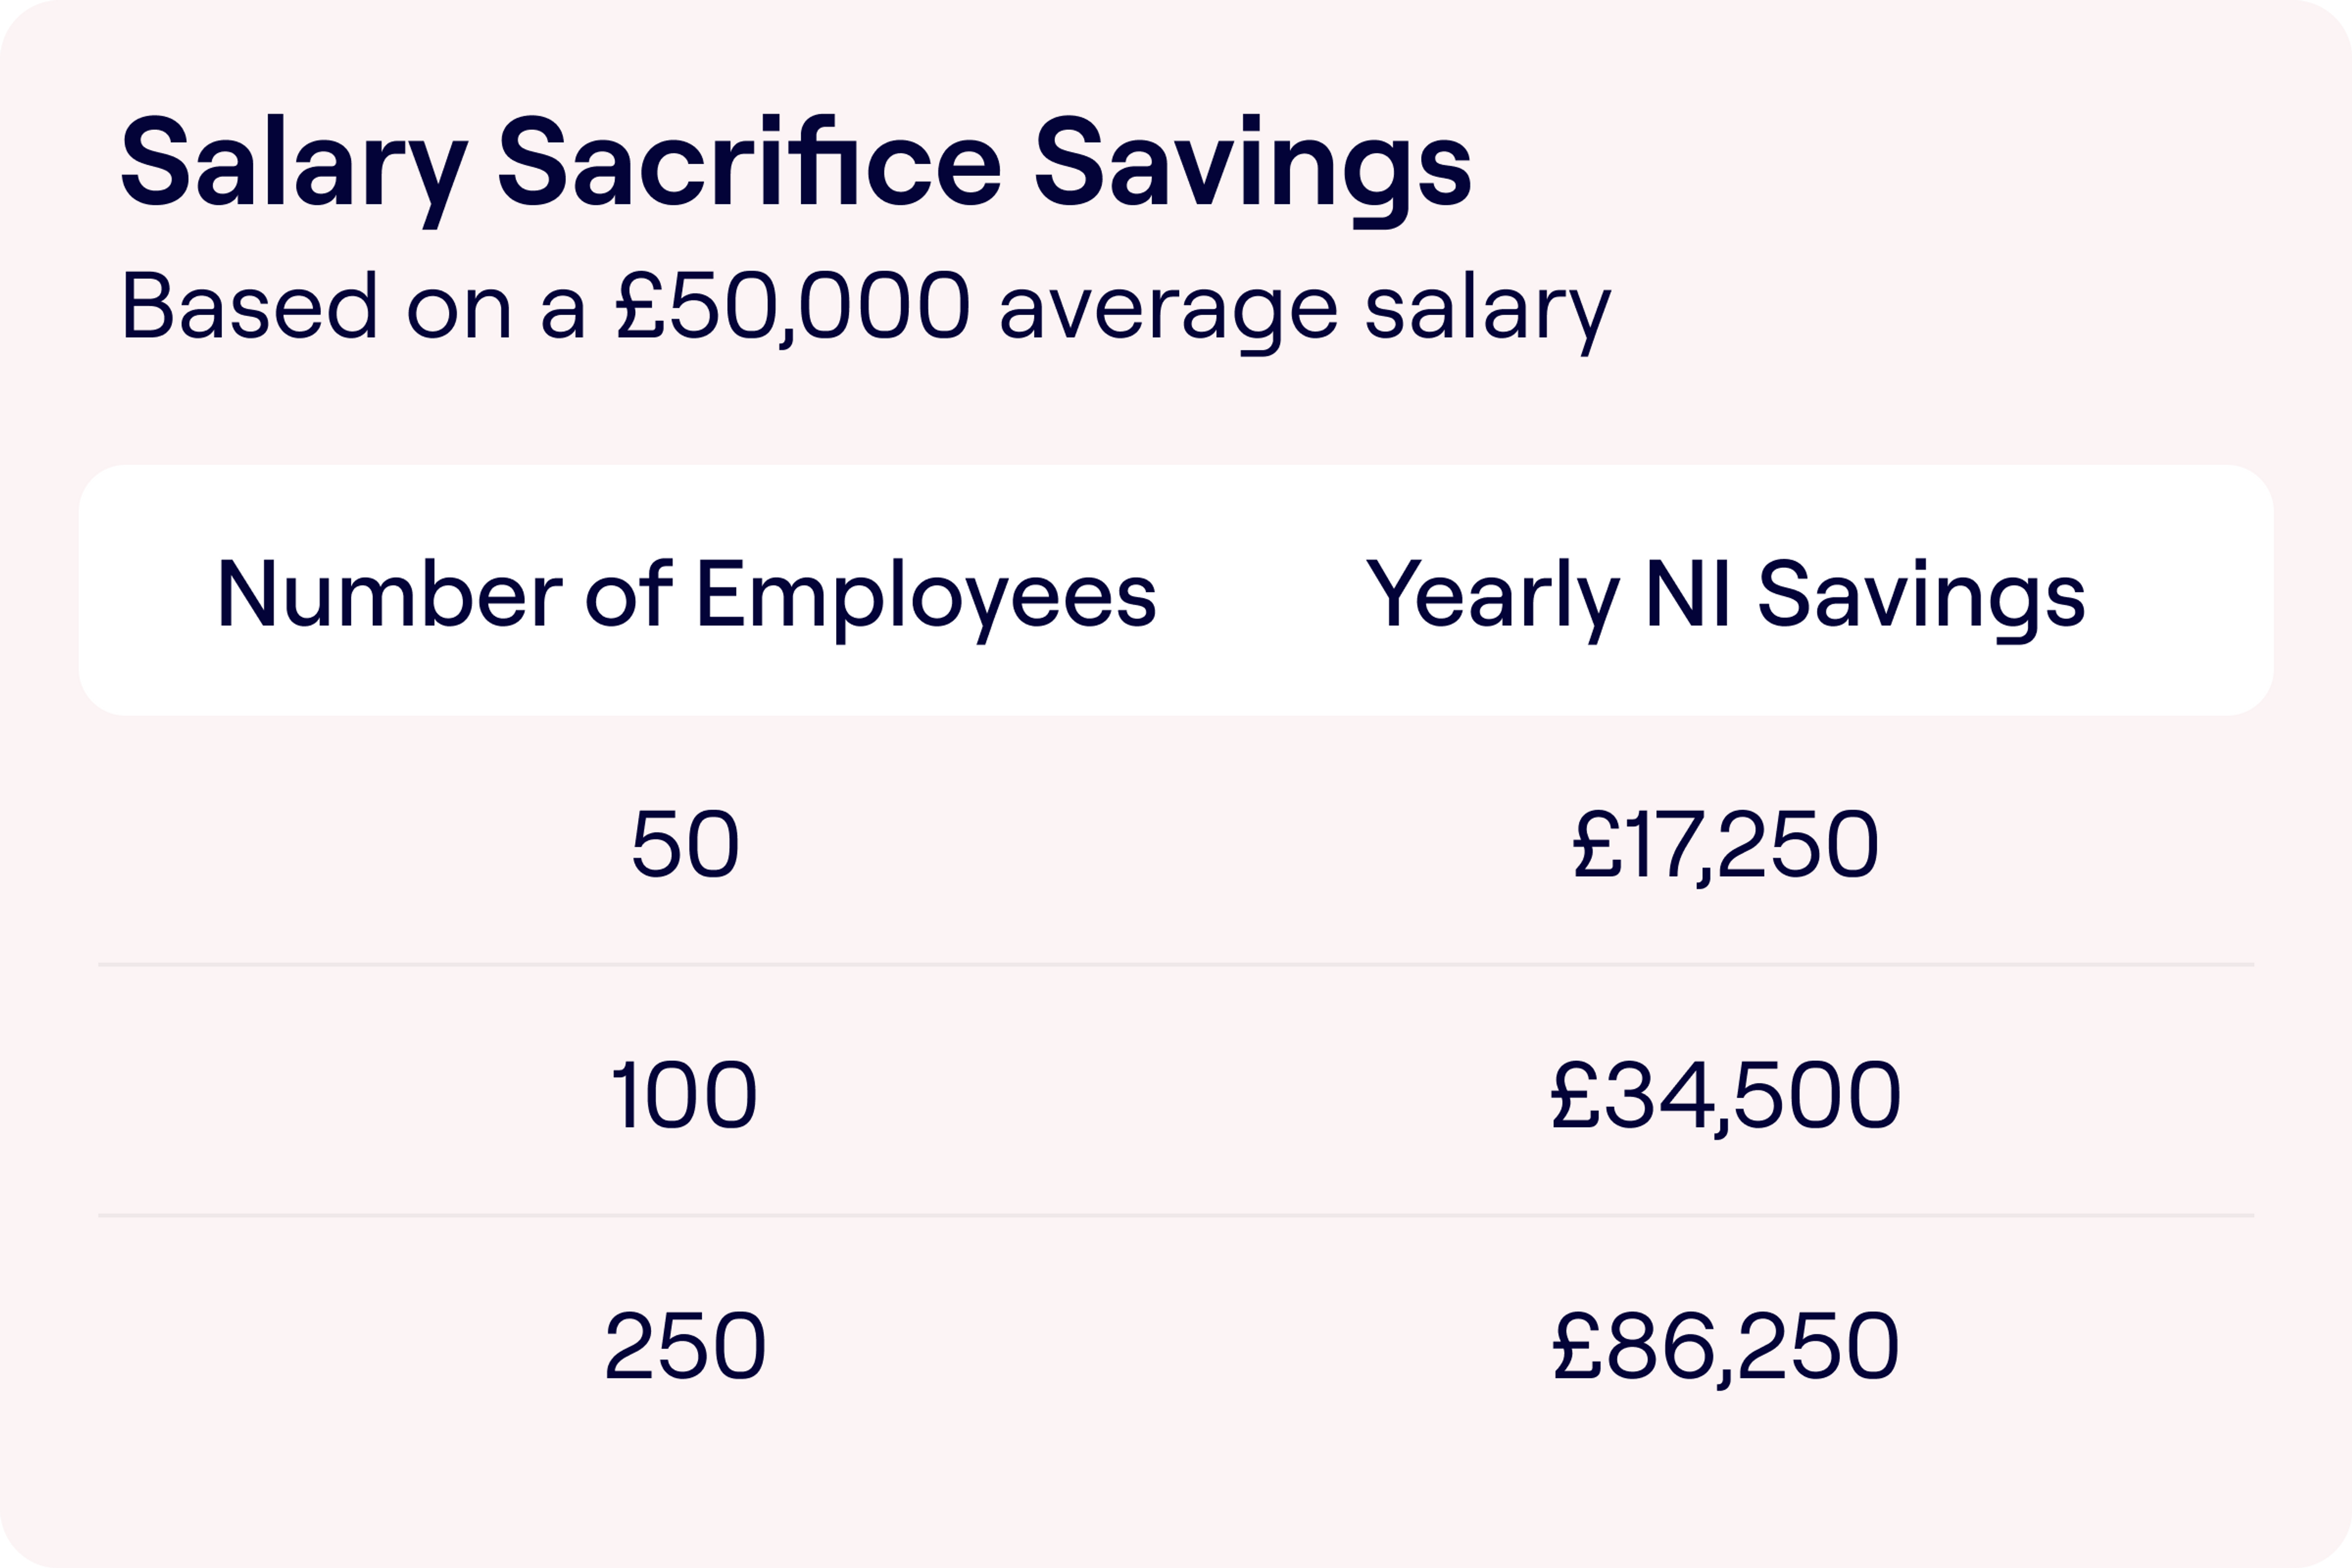 An infographic displaying "Salary Sacrifice Savings" based on a £50,000 average salary. It shows three tiers of yearly National Insurance savings for different numbers of employees: £17,250 for 50 employees, £34,500 for 100 employees, and £86,250 for 250 employees.